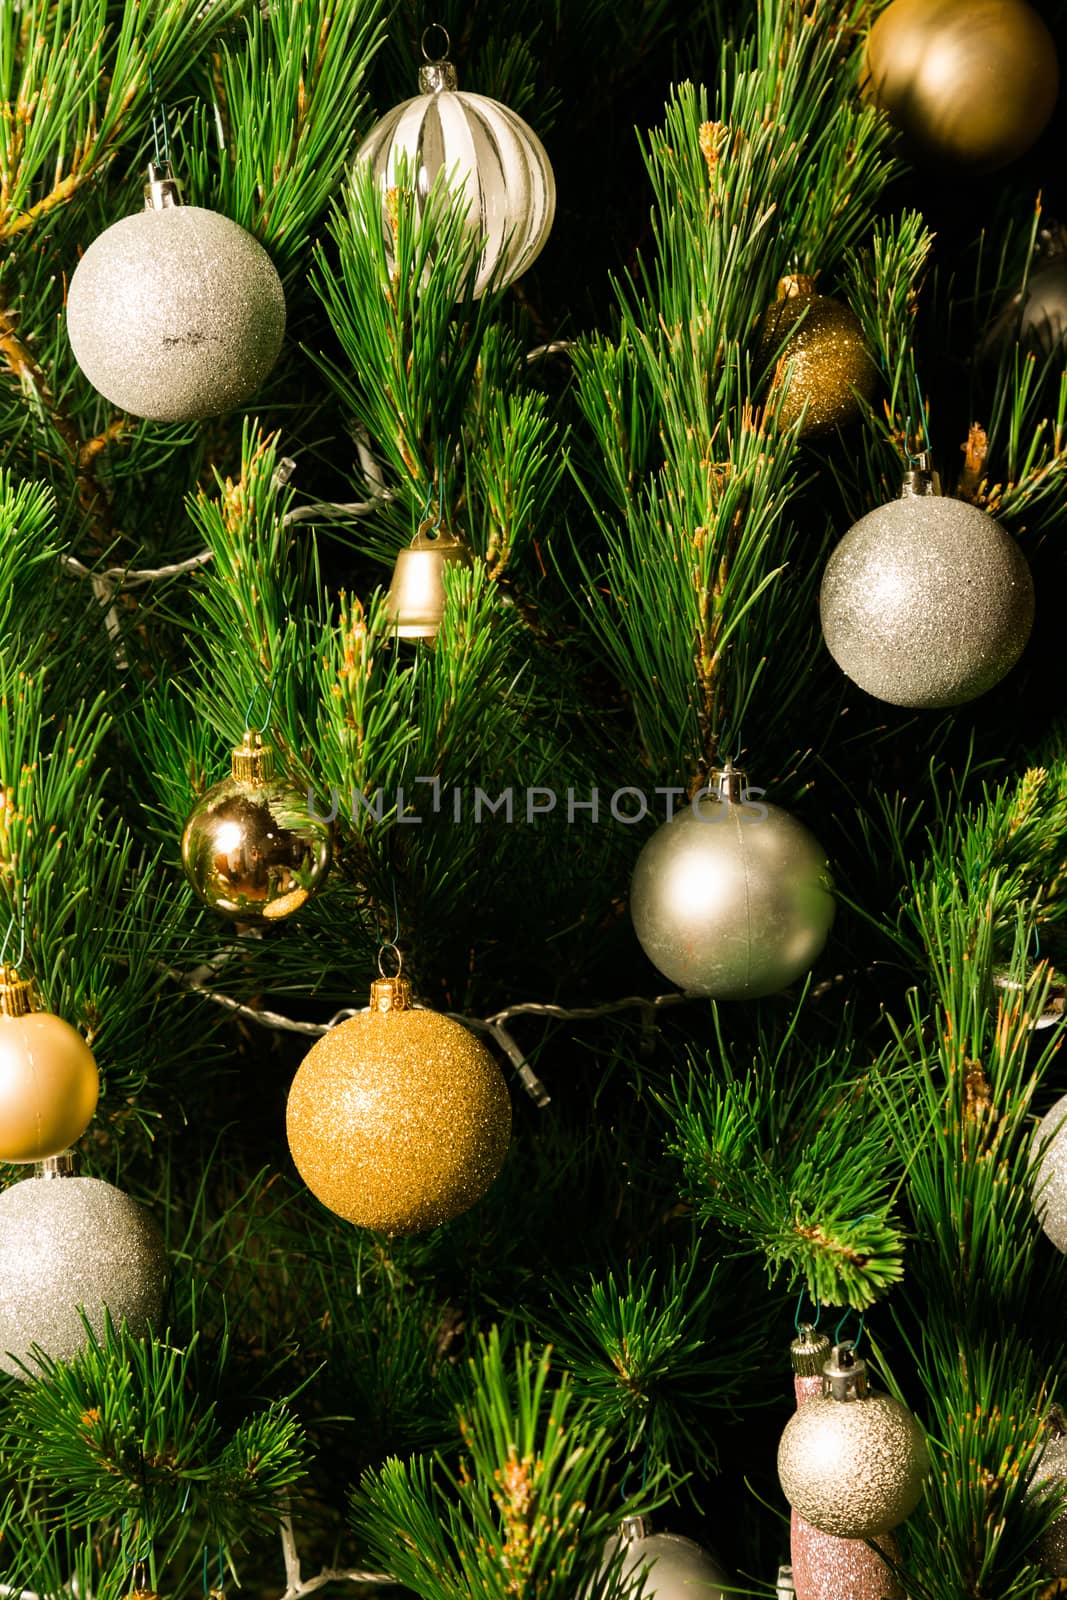 Christmas Tree decorations by davidhewison